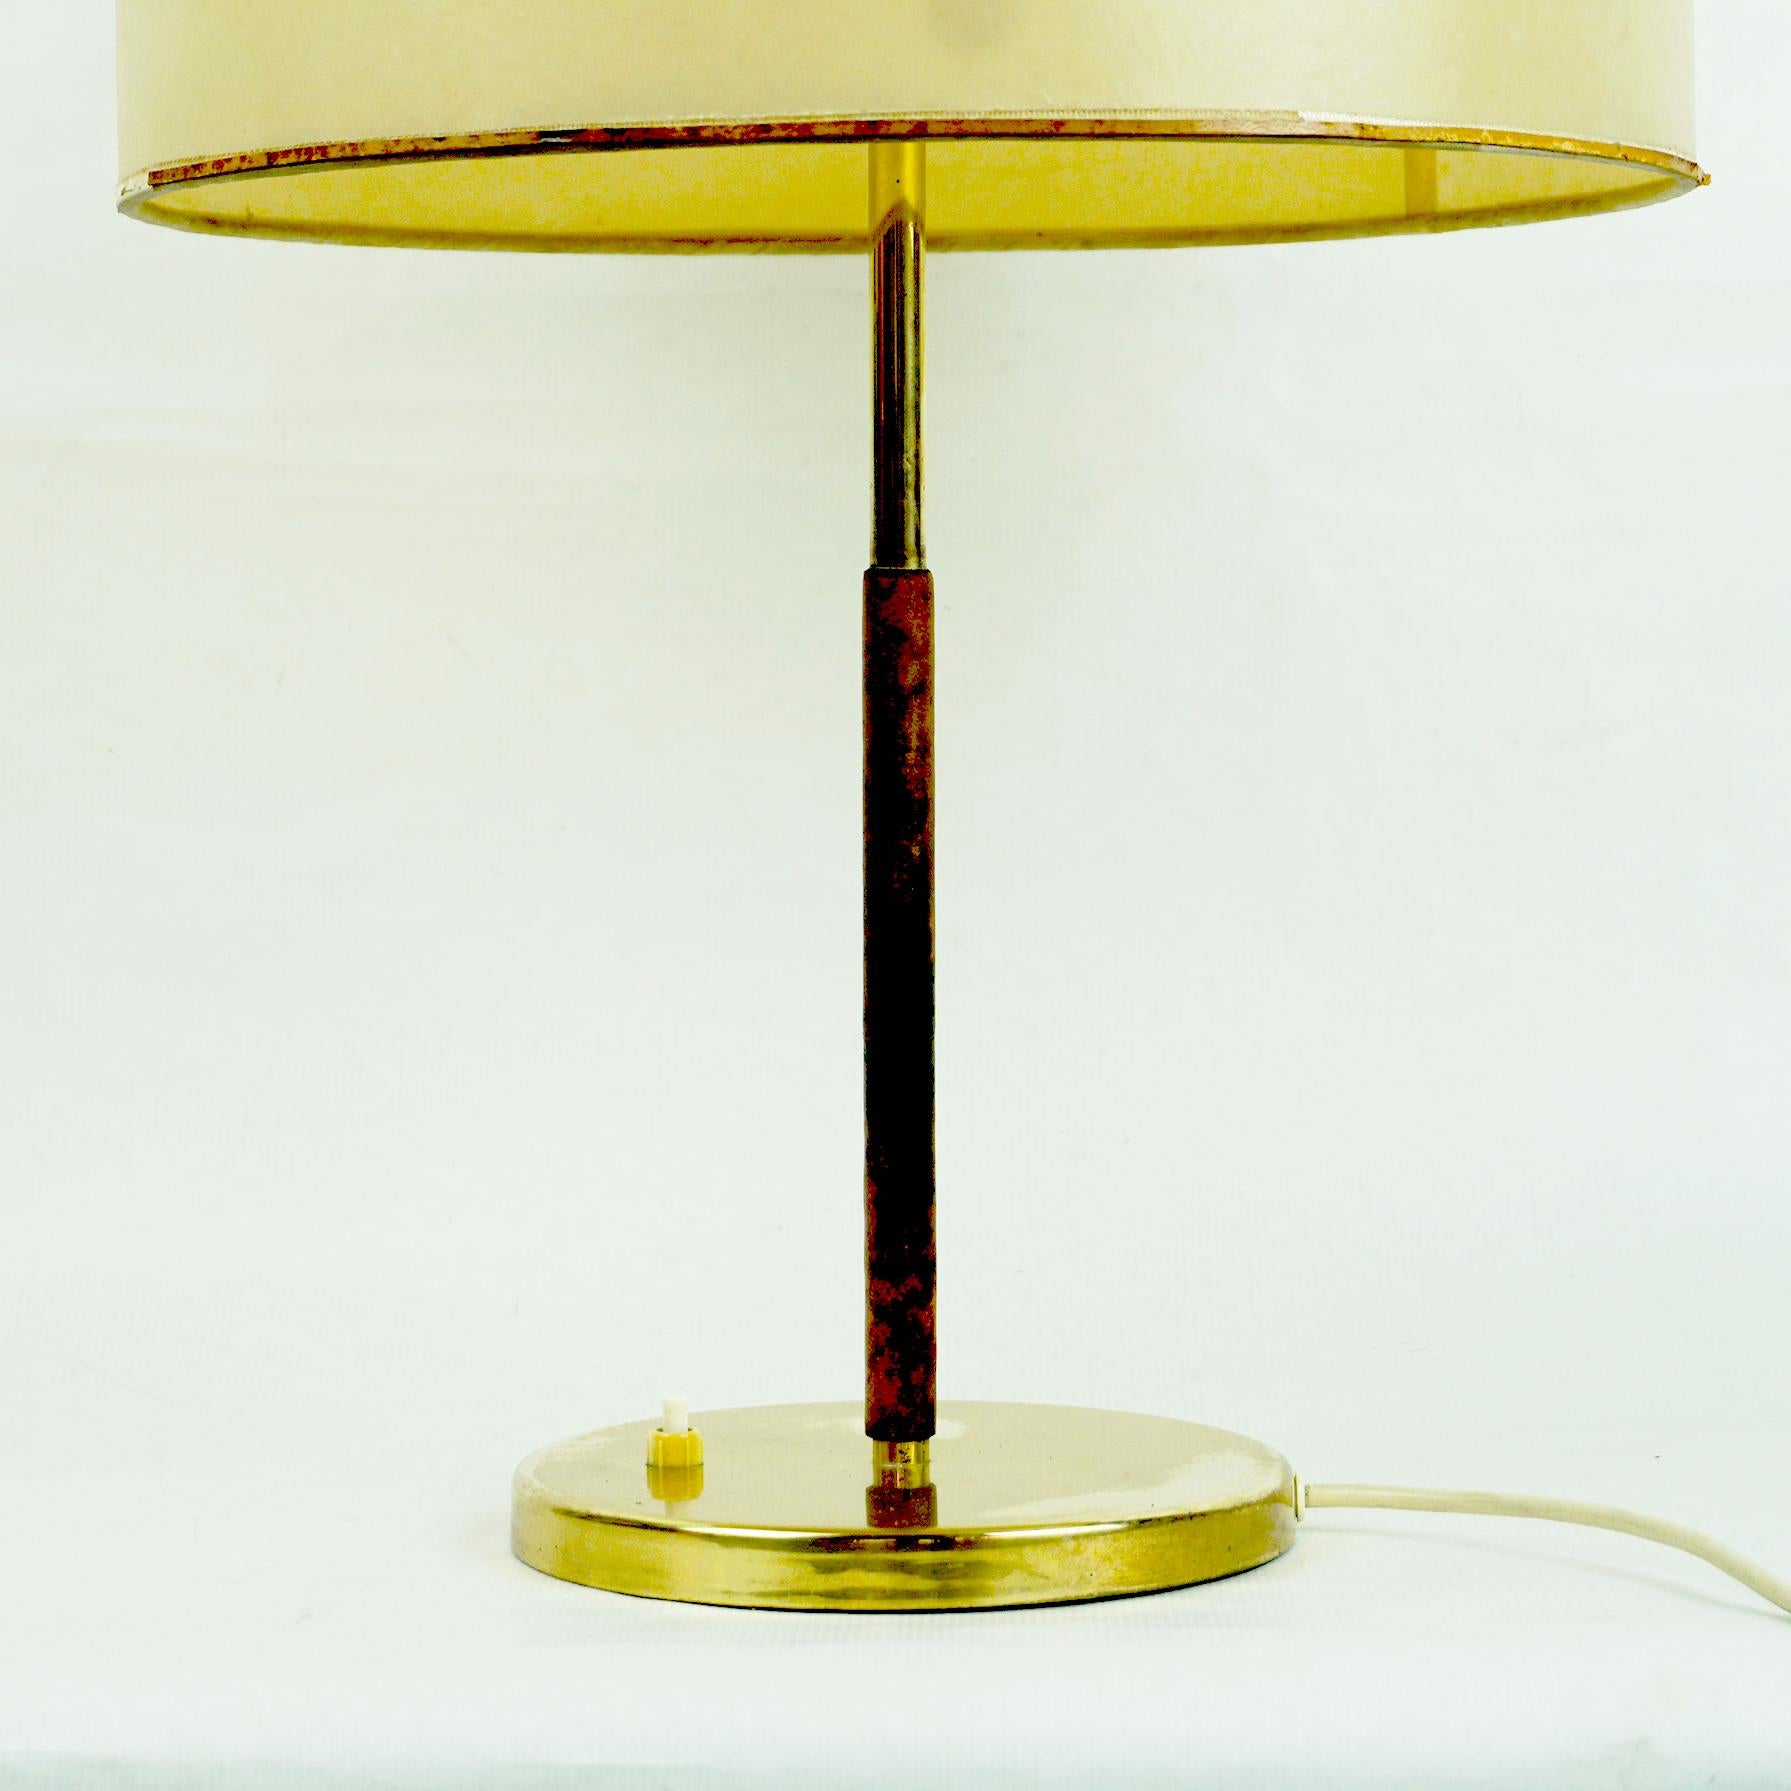 Austrian Midcentury Brass and Leather Table Lamp Mod. 1268 Essen by J. T. Kalmar In Good Condition For Sale In Vienna, AT